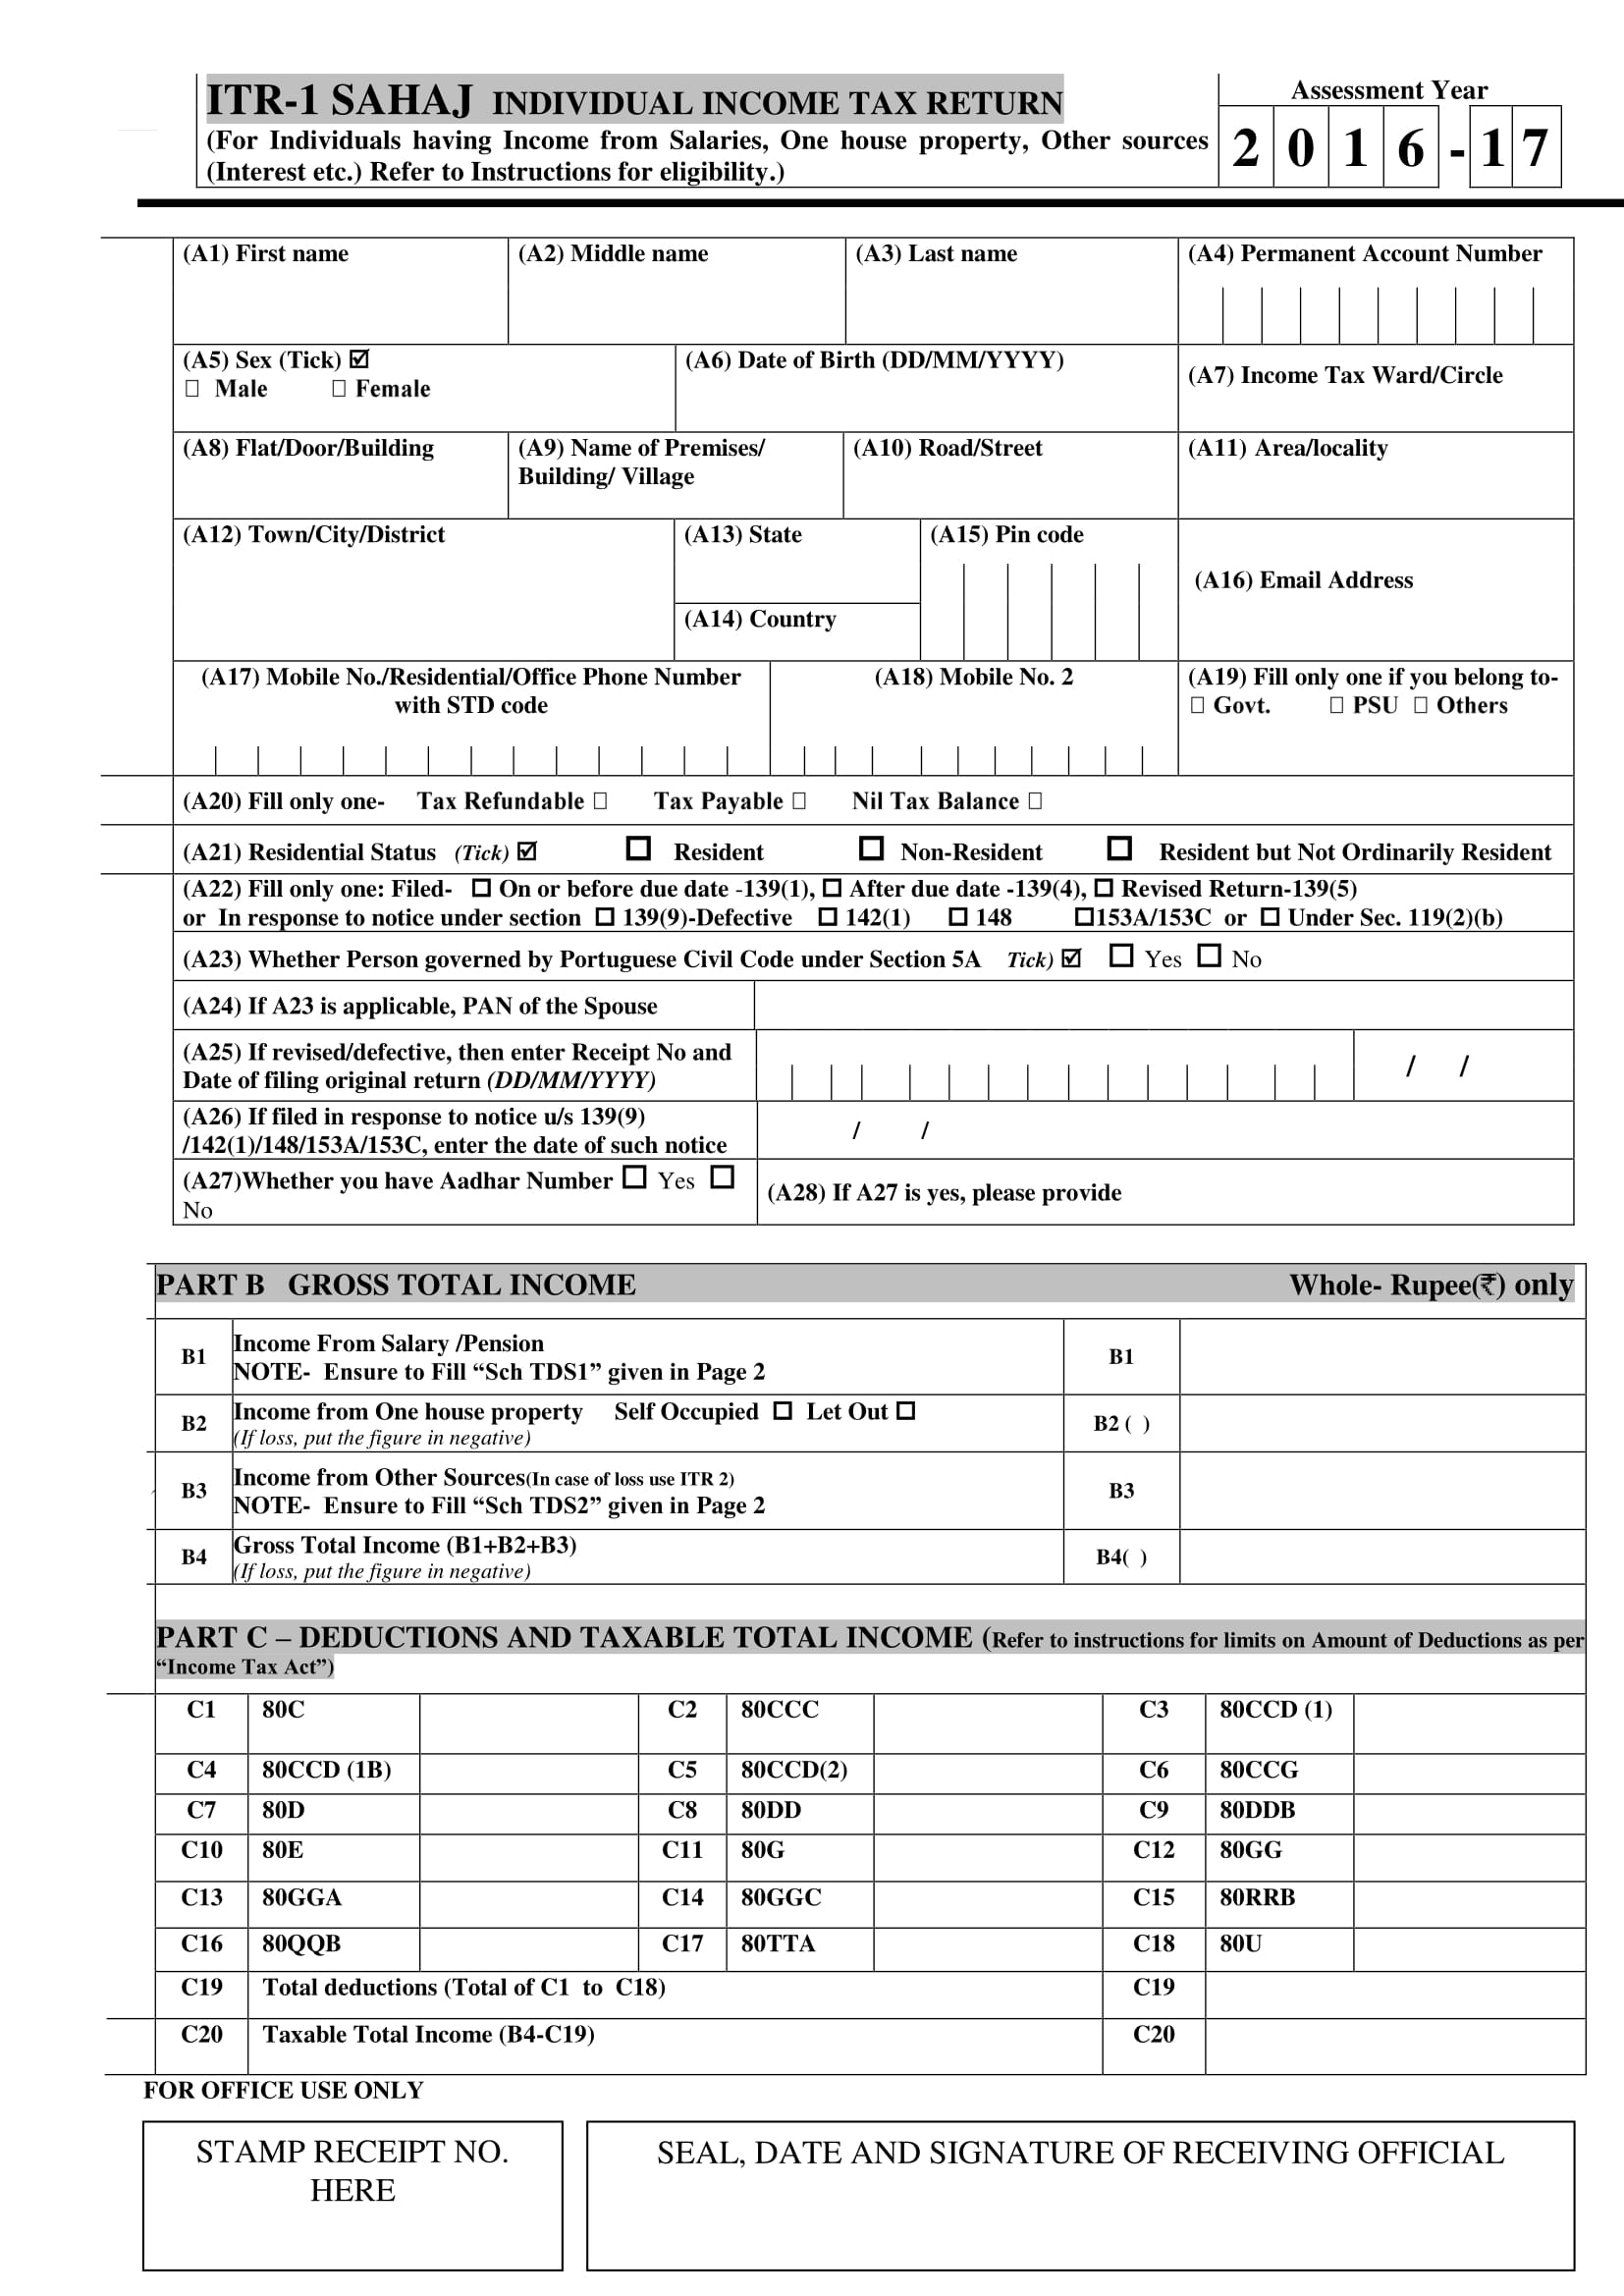 2017 income tax return instructions